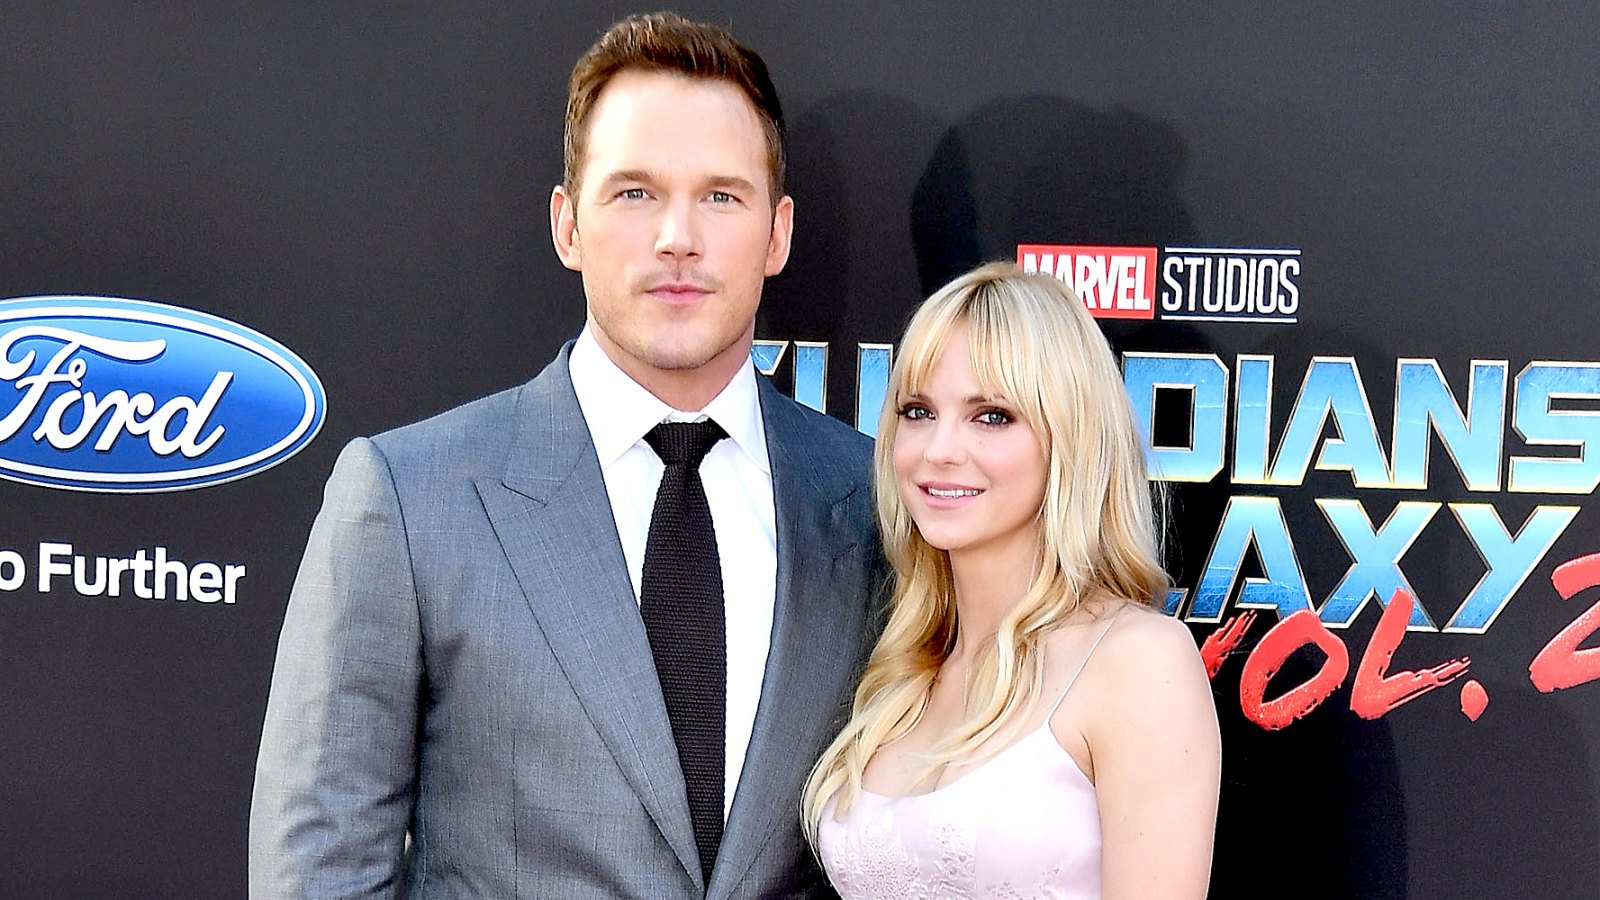 Chris Pratt and Anna Faris arrives at the Premiere Of Disney And Marvel's "Guardians Of The Galaxy Vol. 2" at Dolby Theatre on April 19, 2017 in Hollywood, California.